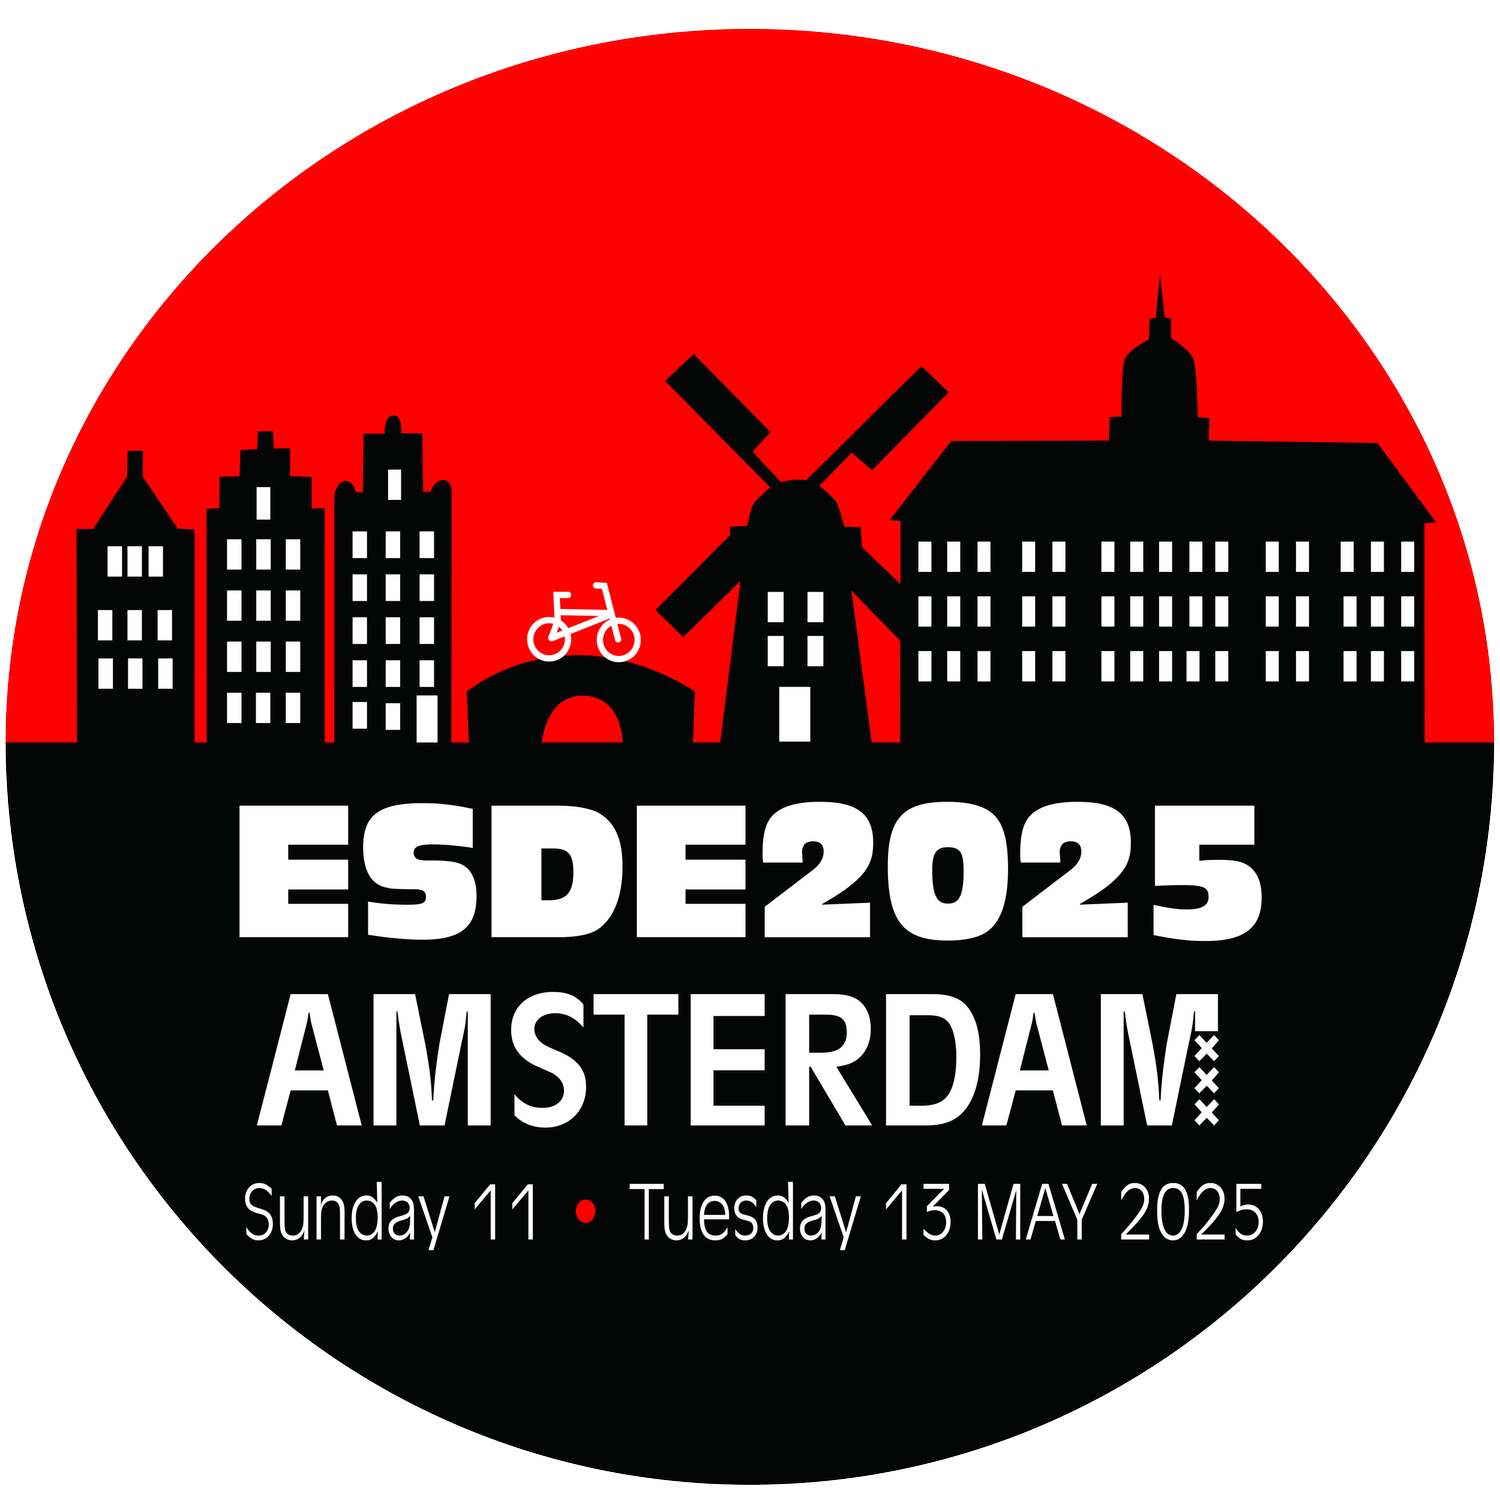 ESDE2025